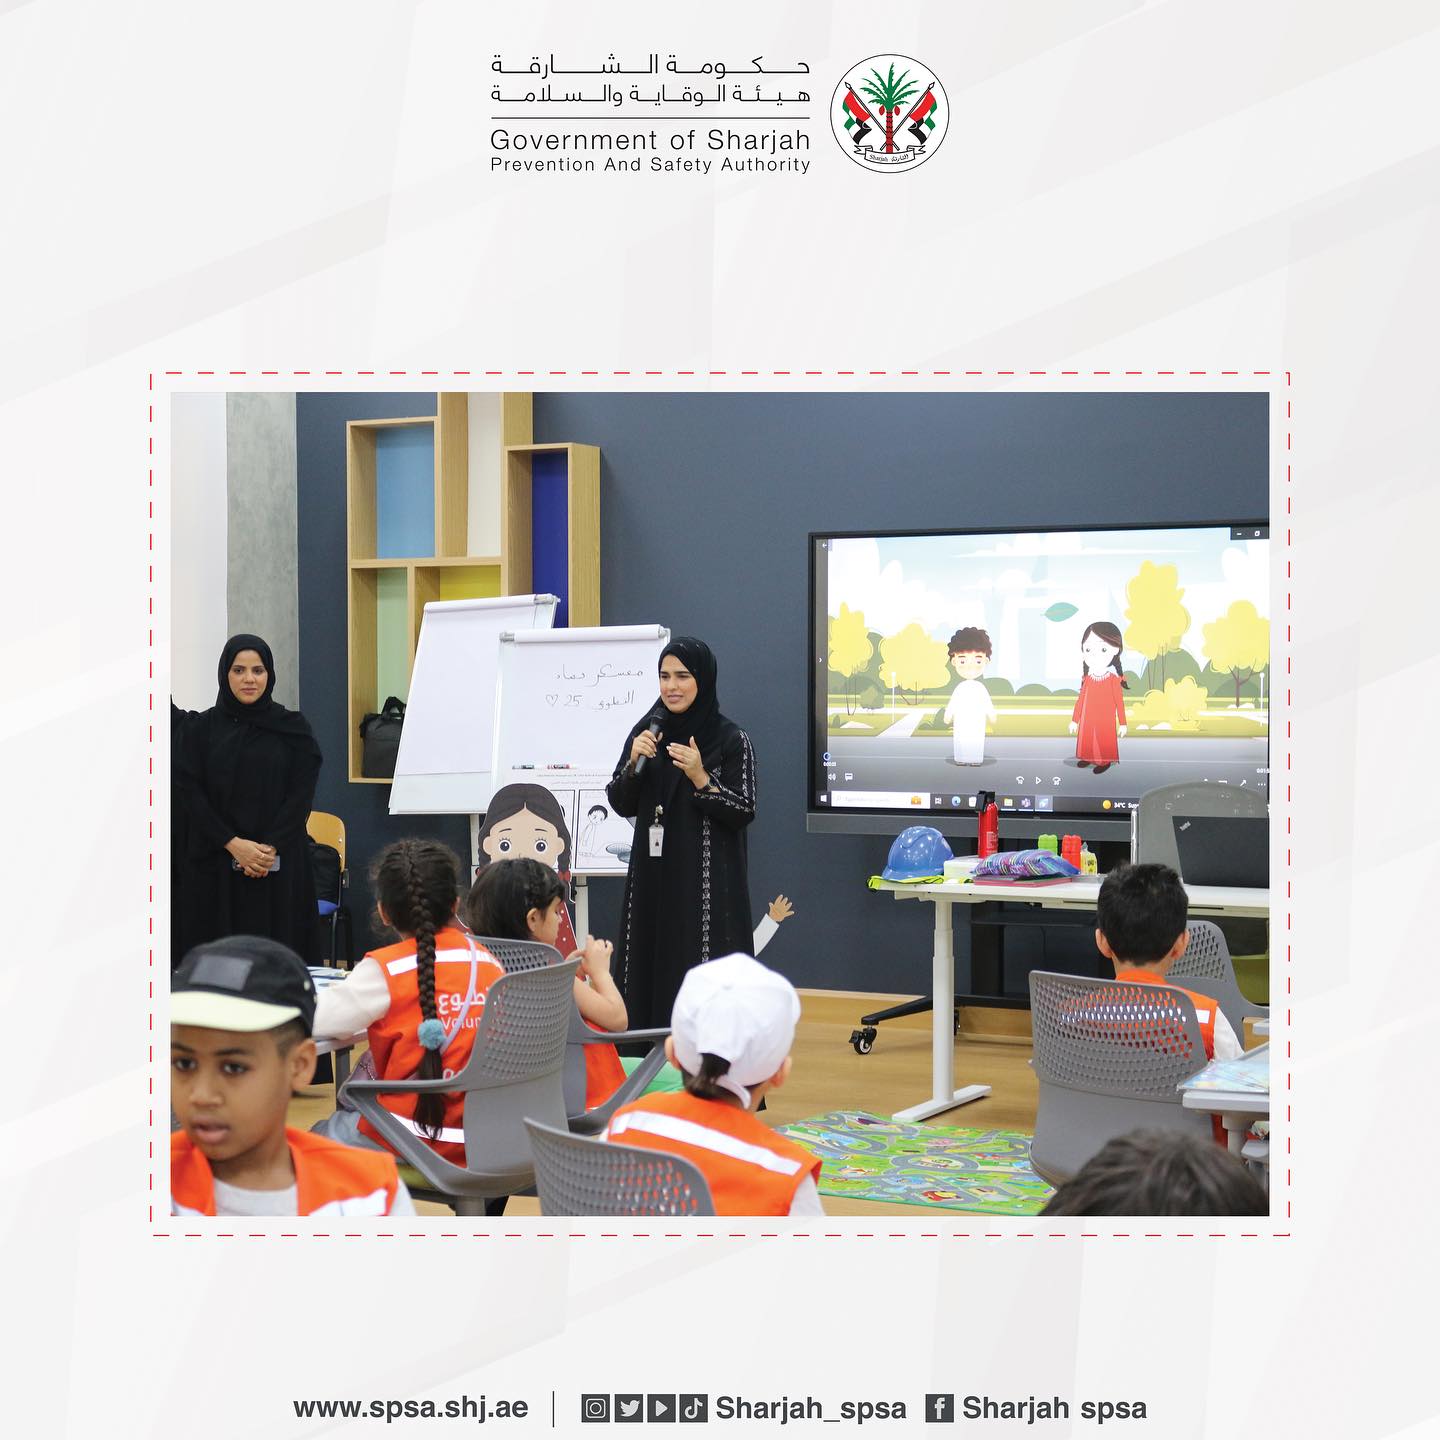 Salama and Hammoud workshop for Sharjah Center for Voluntary Work